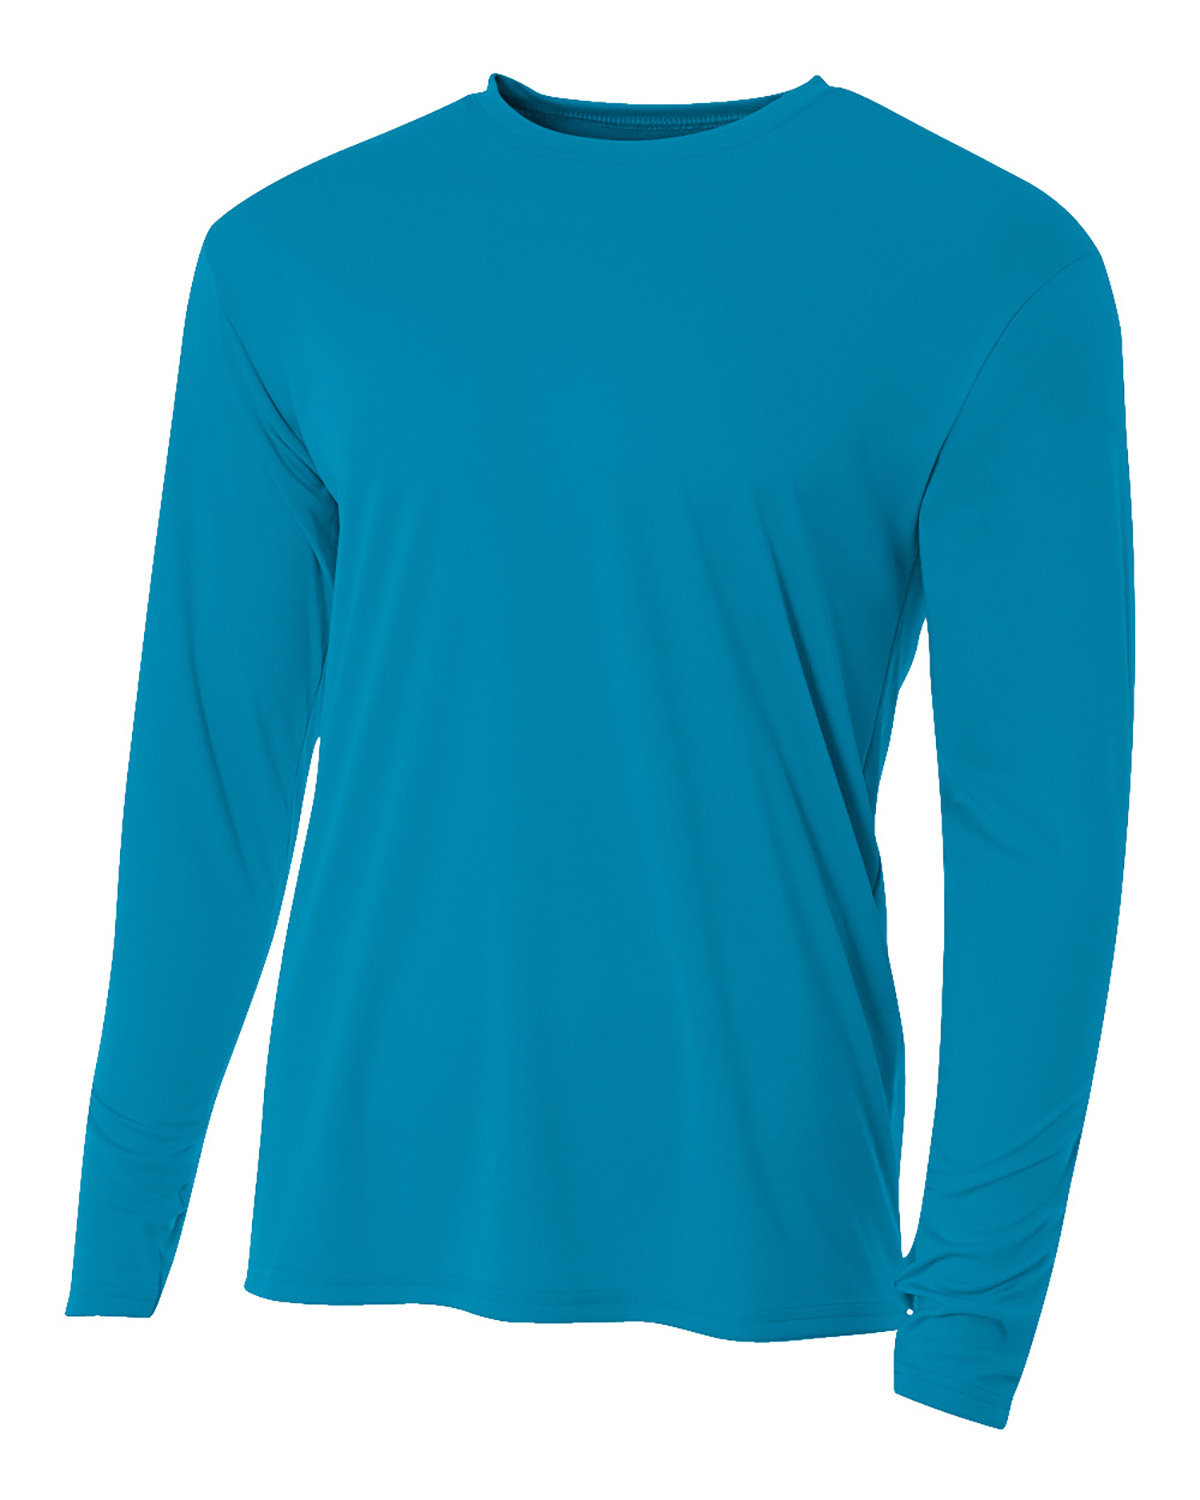 A4 Youth Long Sleeve Cooling Performance Crew Shirt ELECTRIC BLUE 